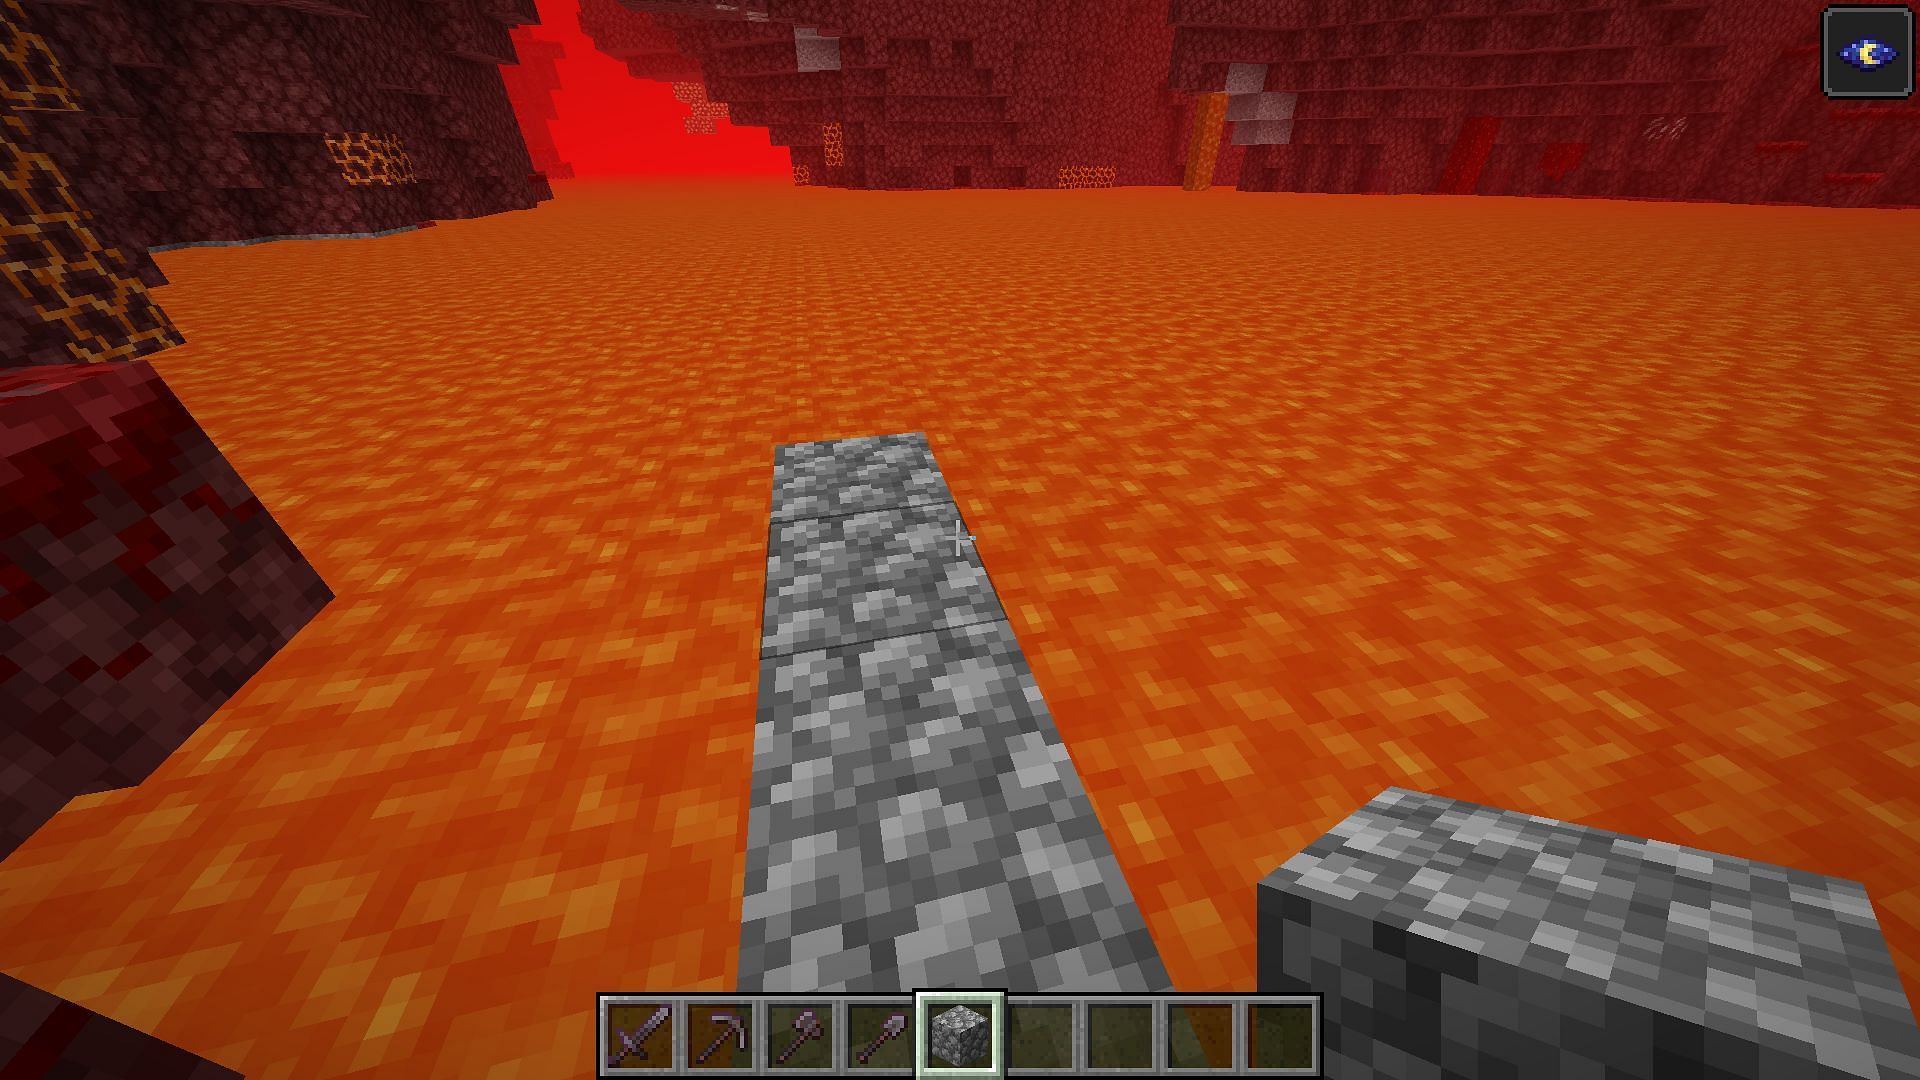 Place a few blocks on the lava level in Minecraft (Image via Mojang)